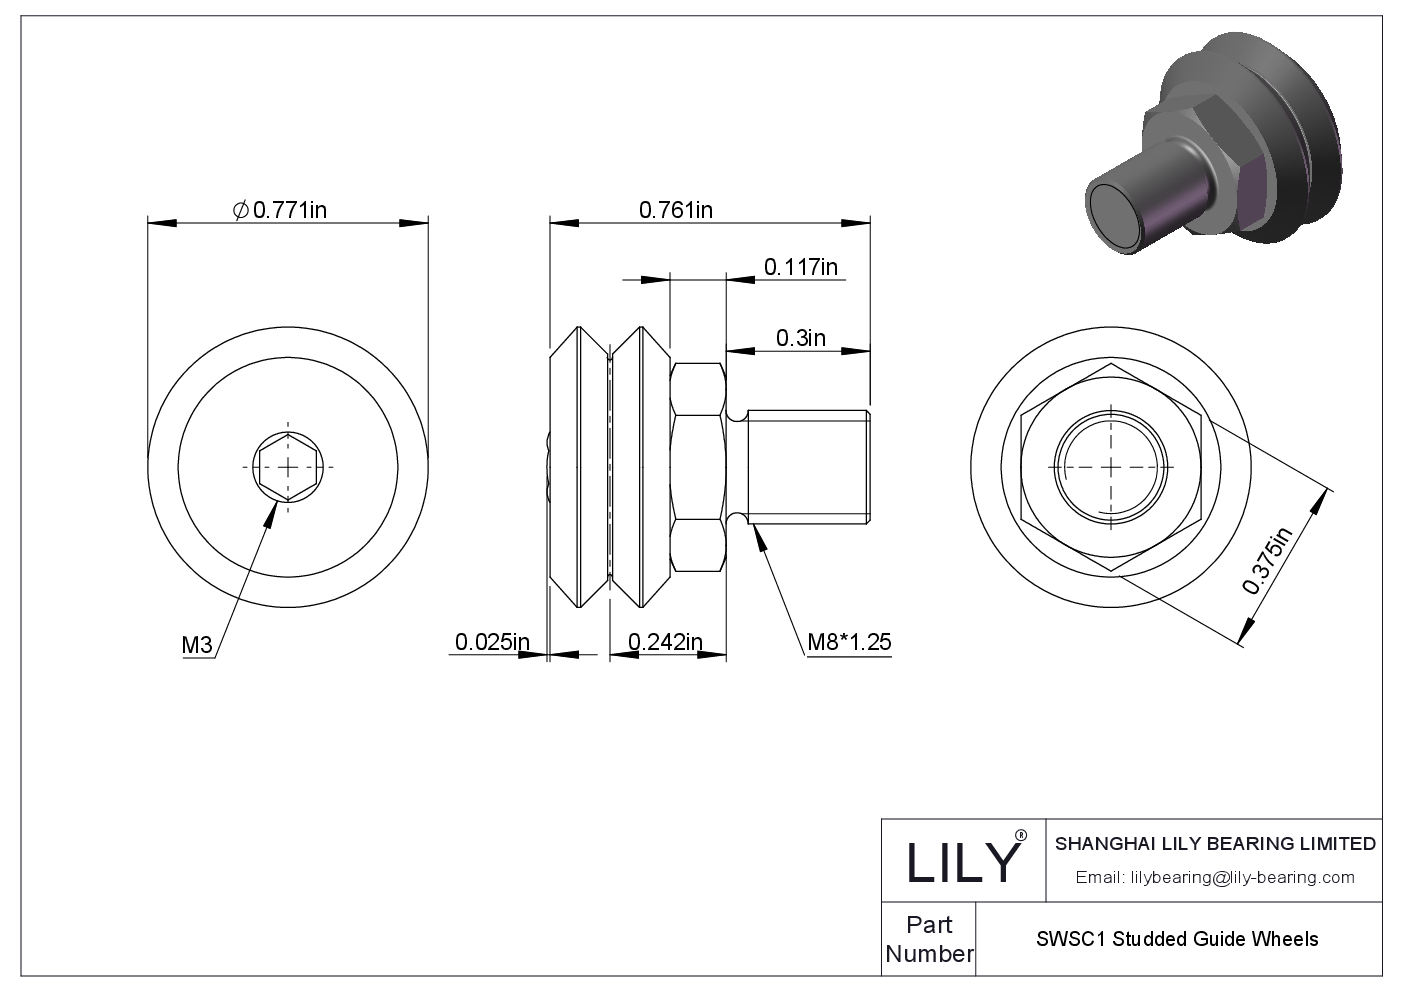 SWSC1 Studded Guide Wheels cad drawing